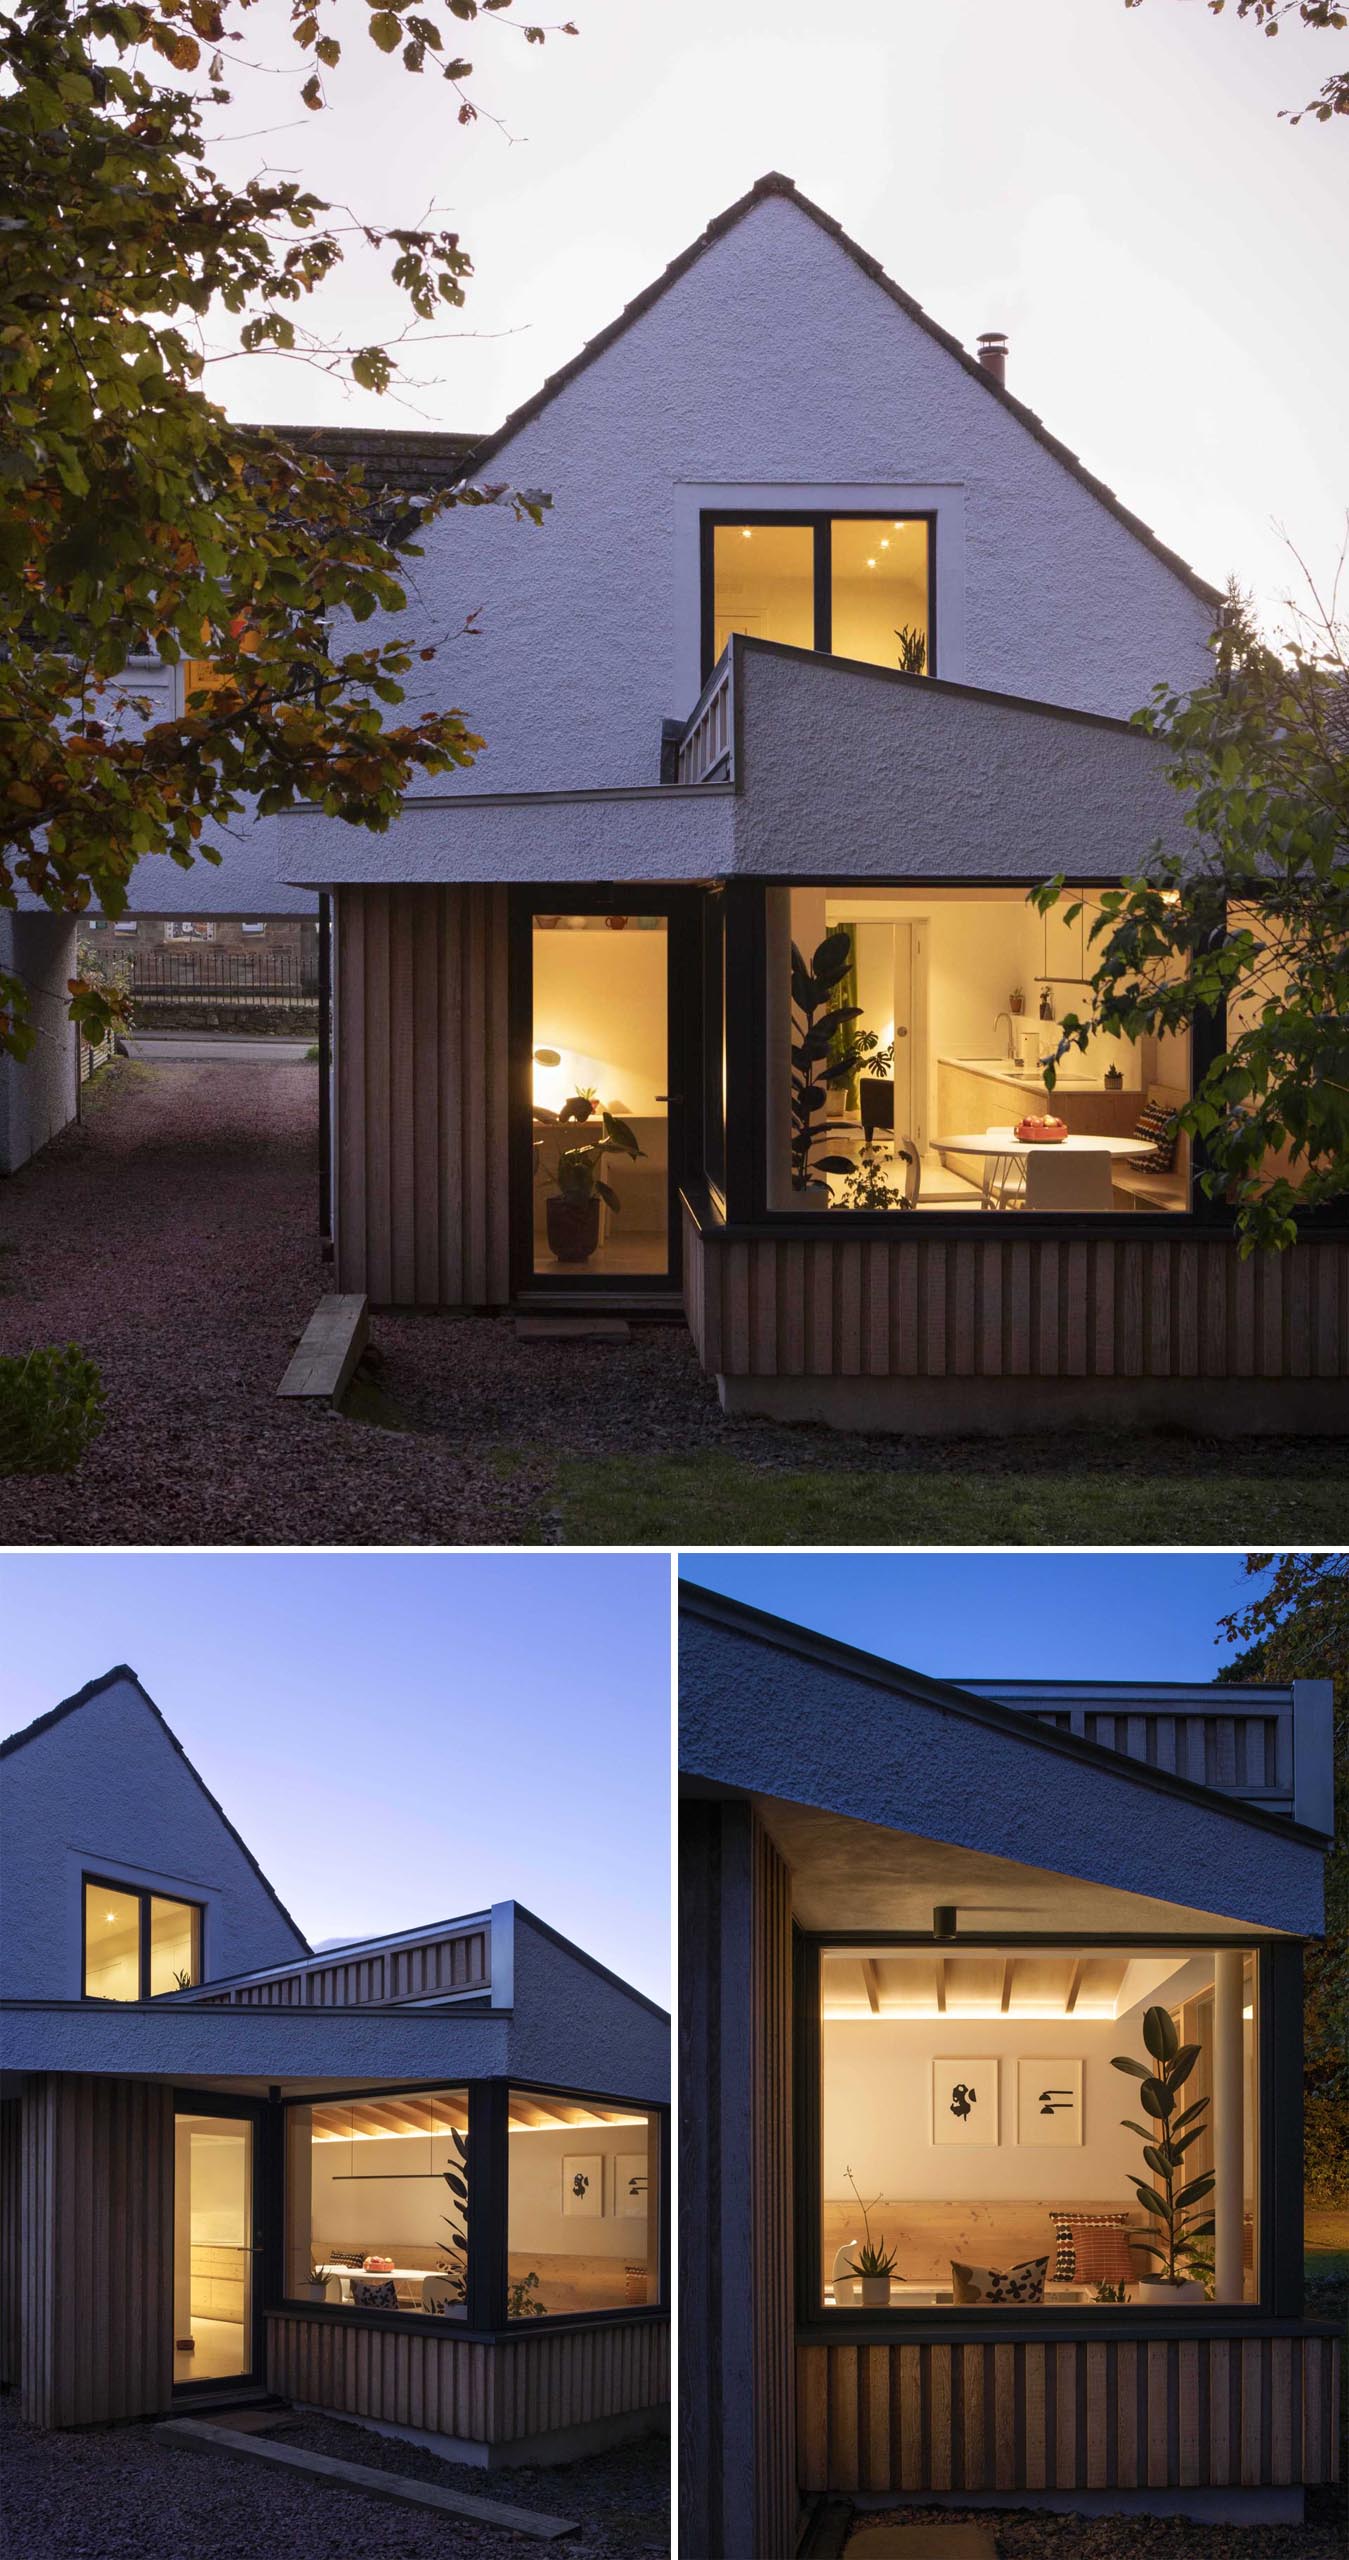 At night, the glow of the interior lights in this contemporary extension highlights the warm wood design of the ceiling.